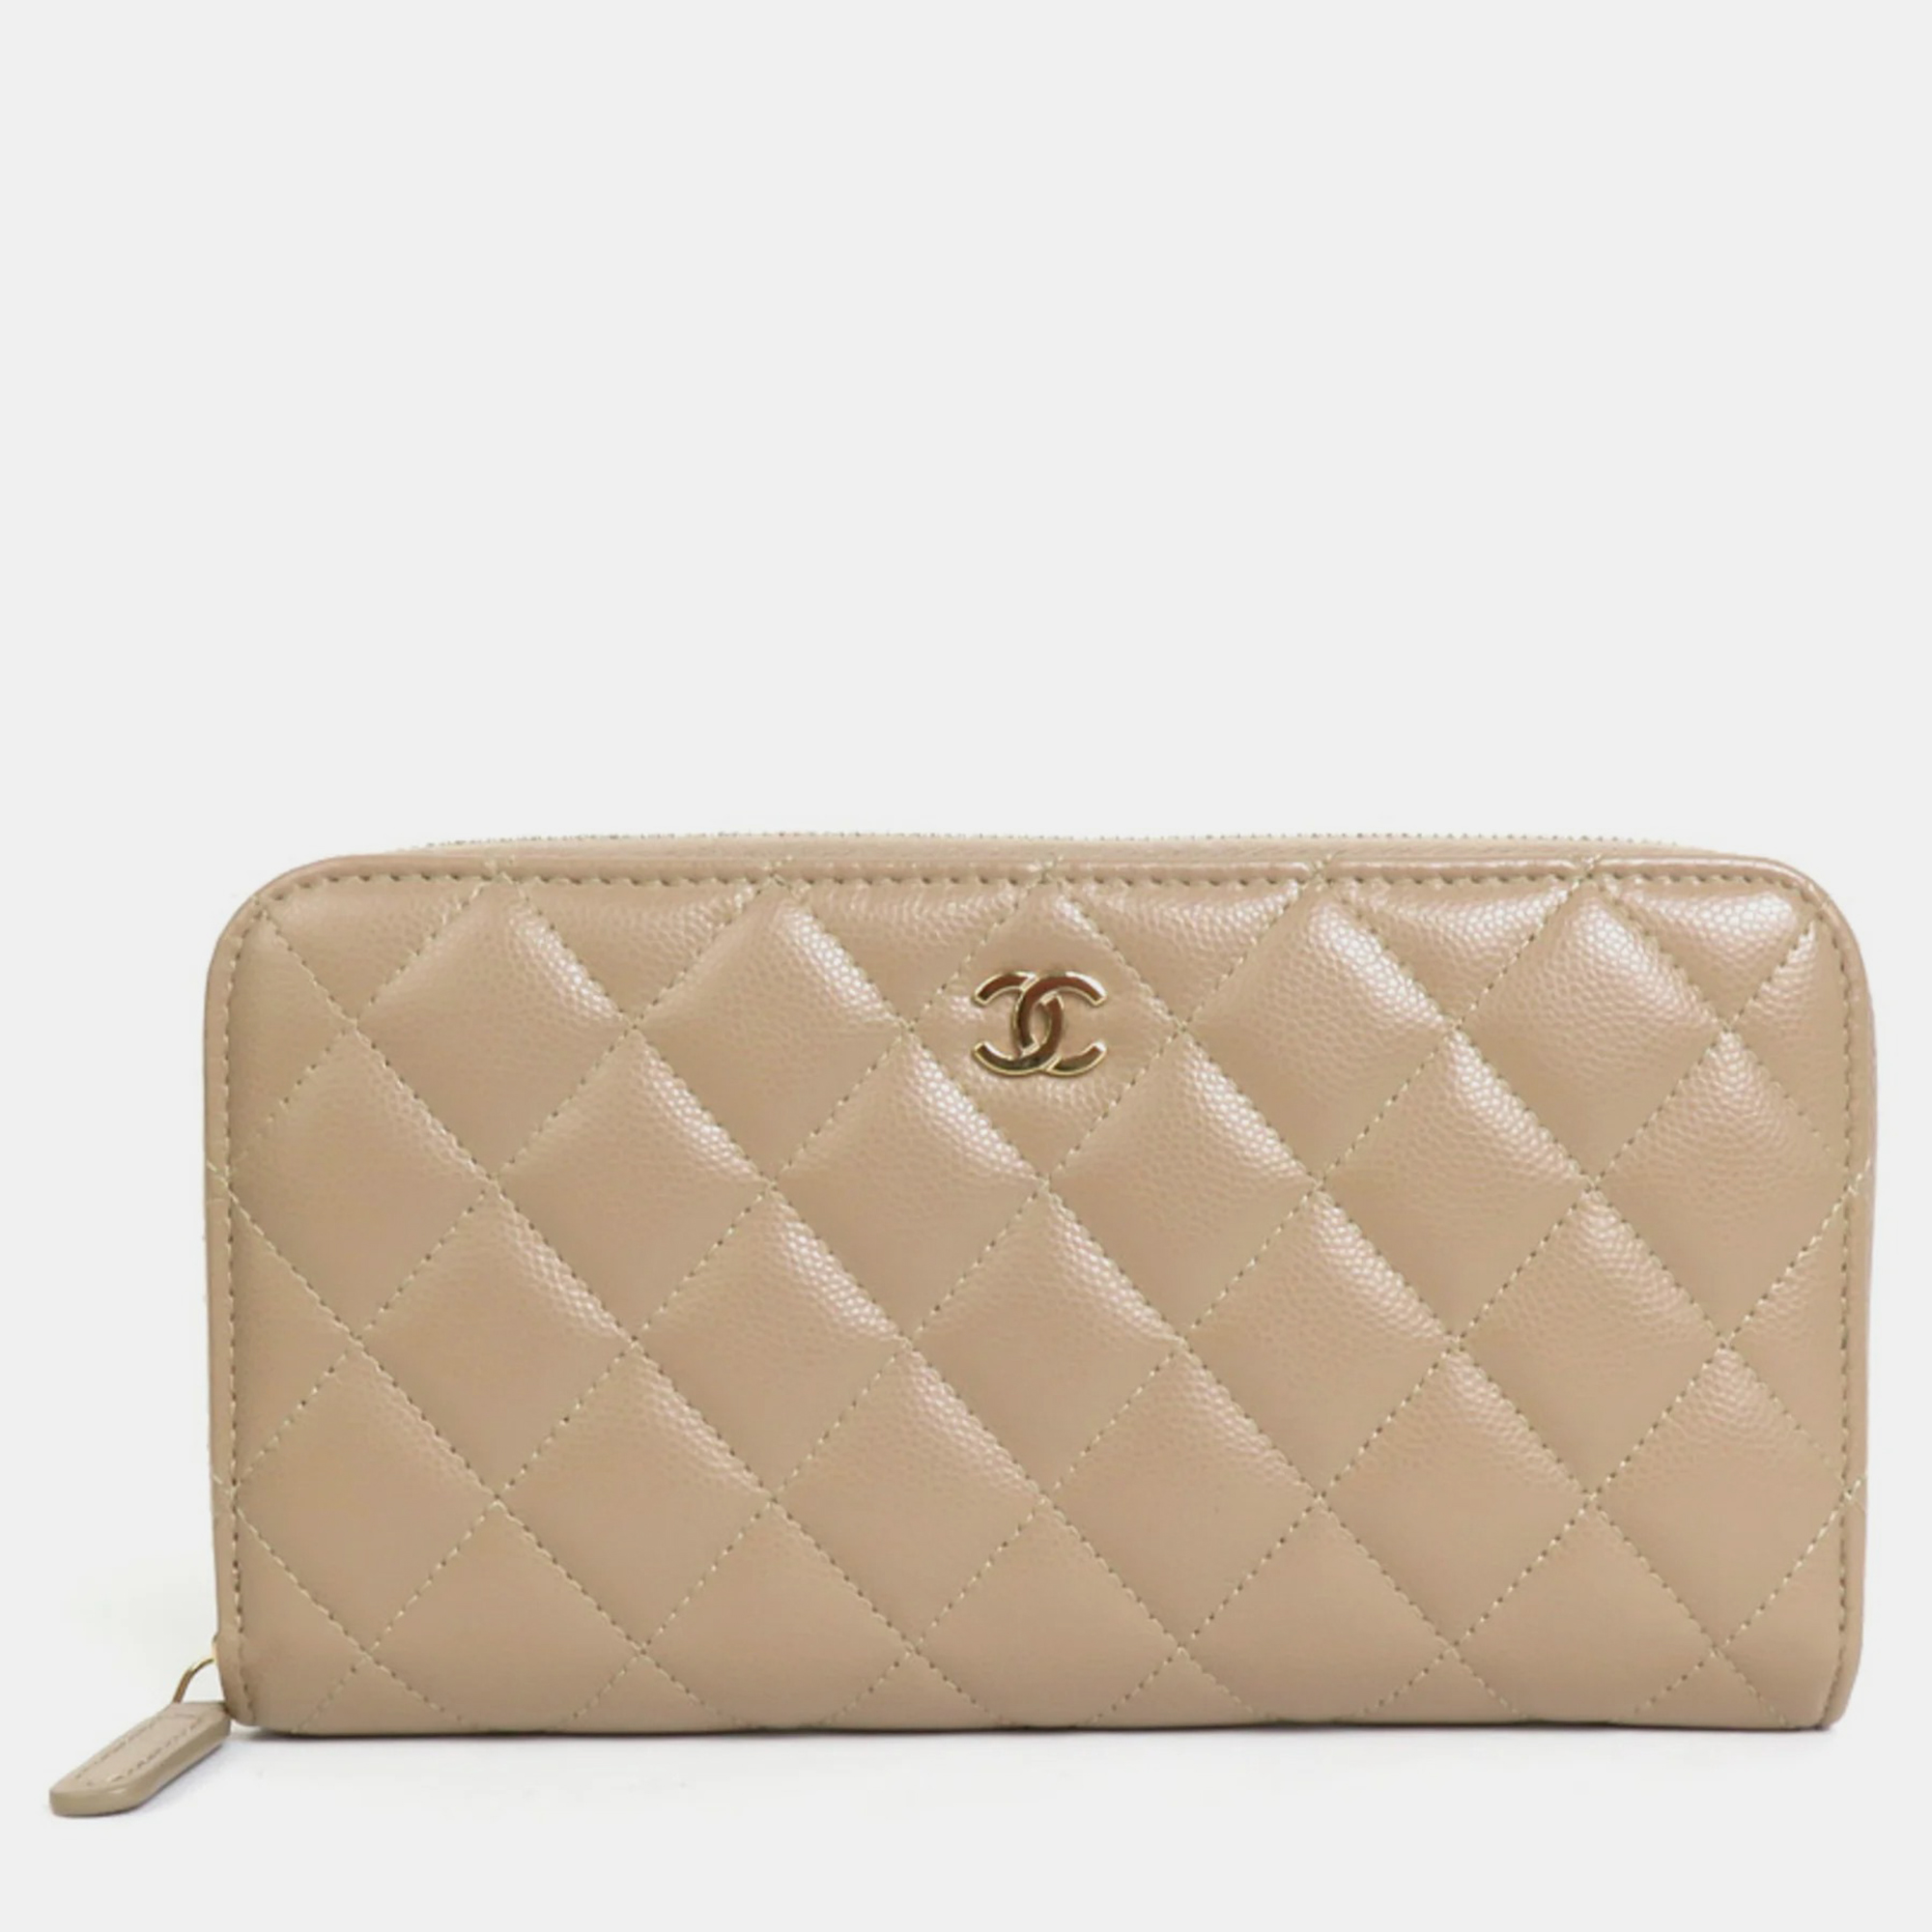 Pre-owned Chanel Beige Quilted Caviar Leather Cc Logo Zip Around Wallet